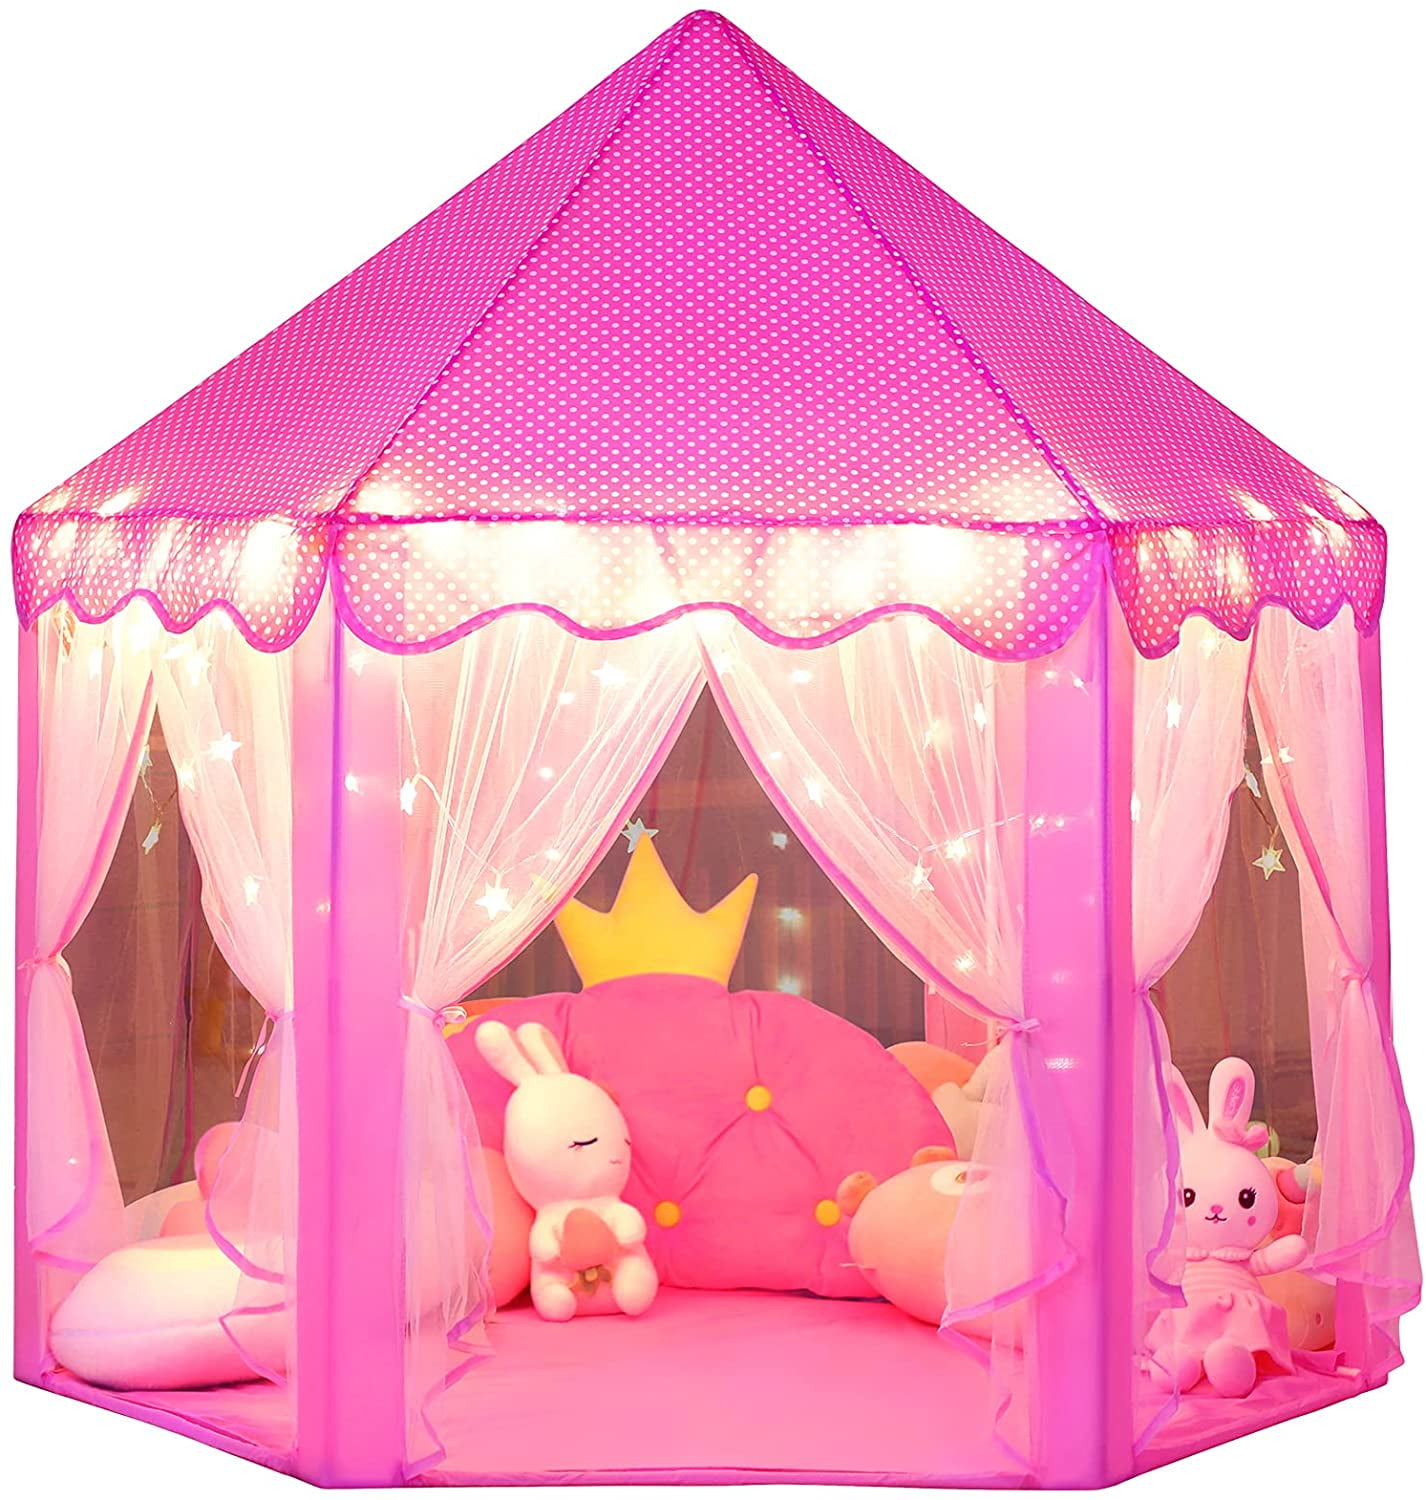 MonoBeach Princess Large Playhouse for Girls with 20 ft Star Lights for sale online 